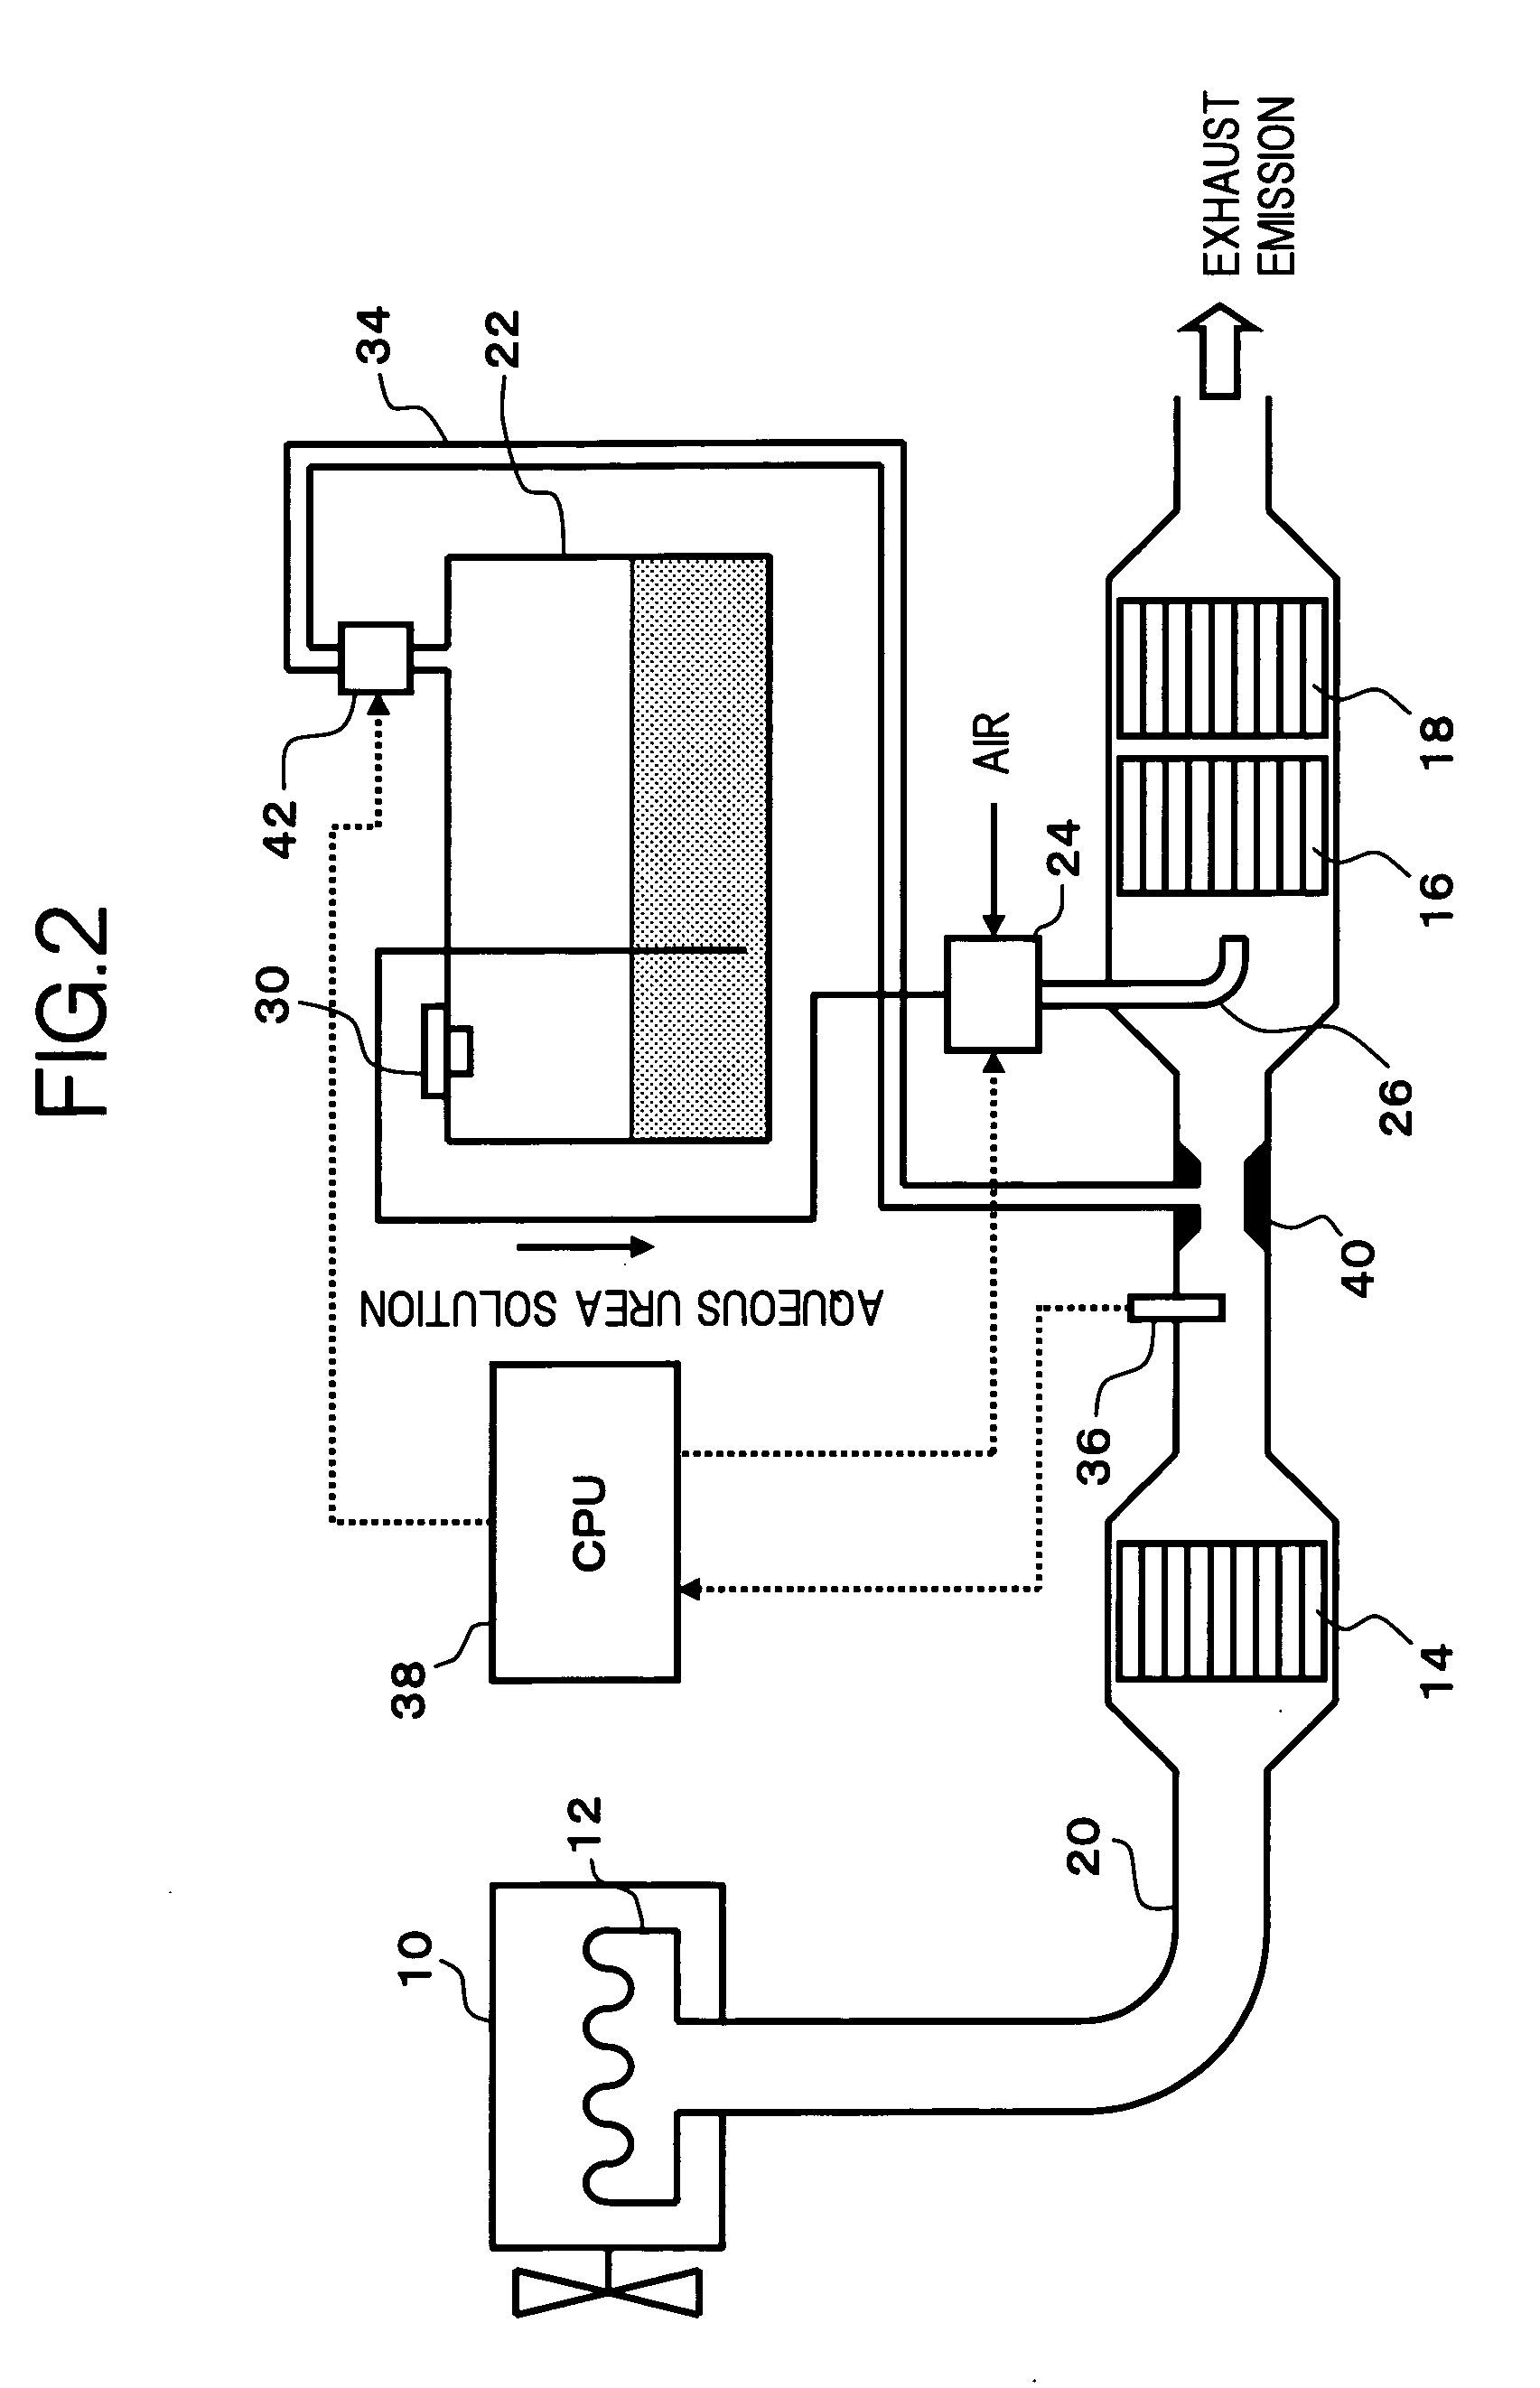 Exhaust emission purifying apparatus for engine